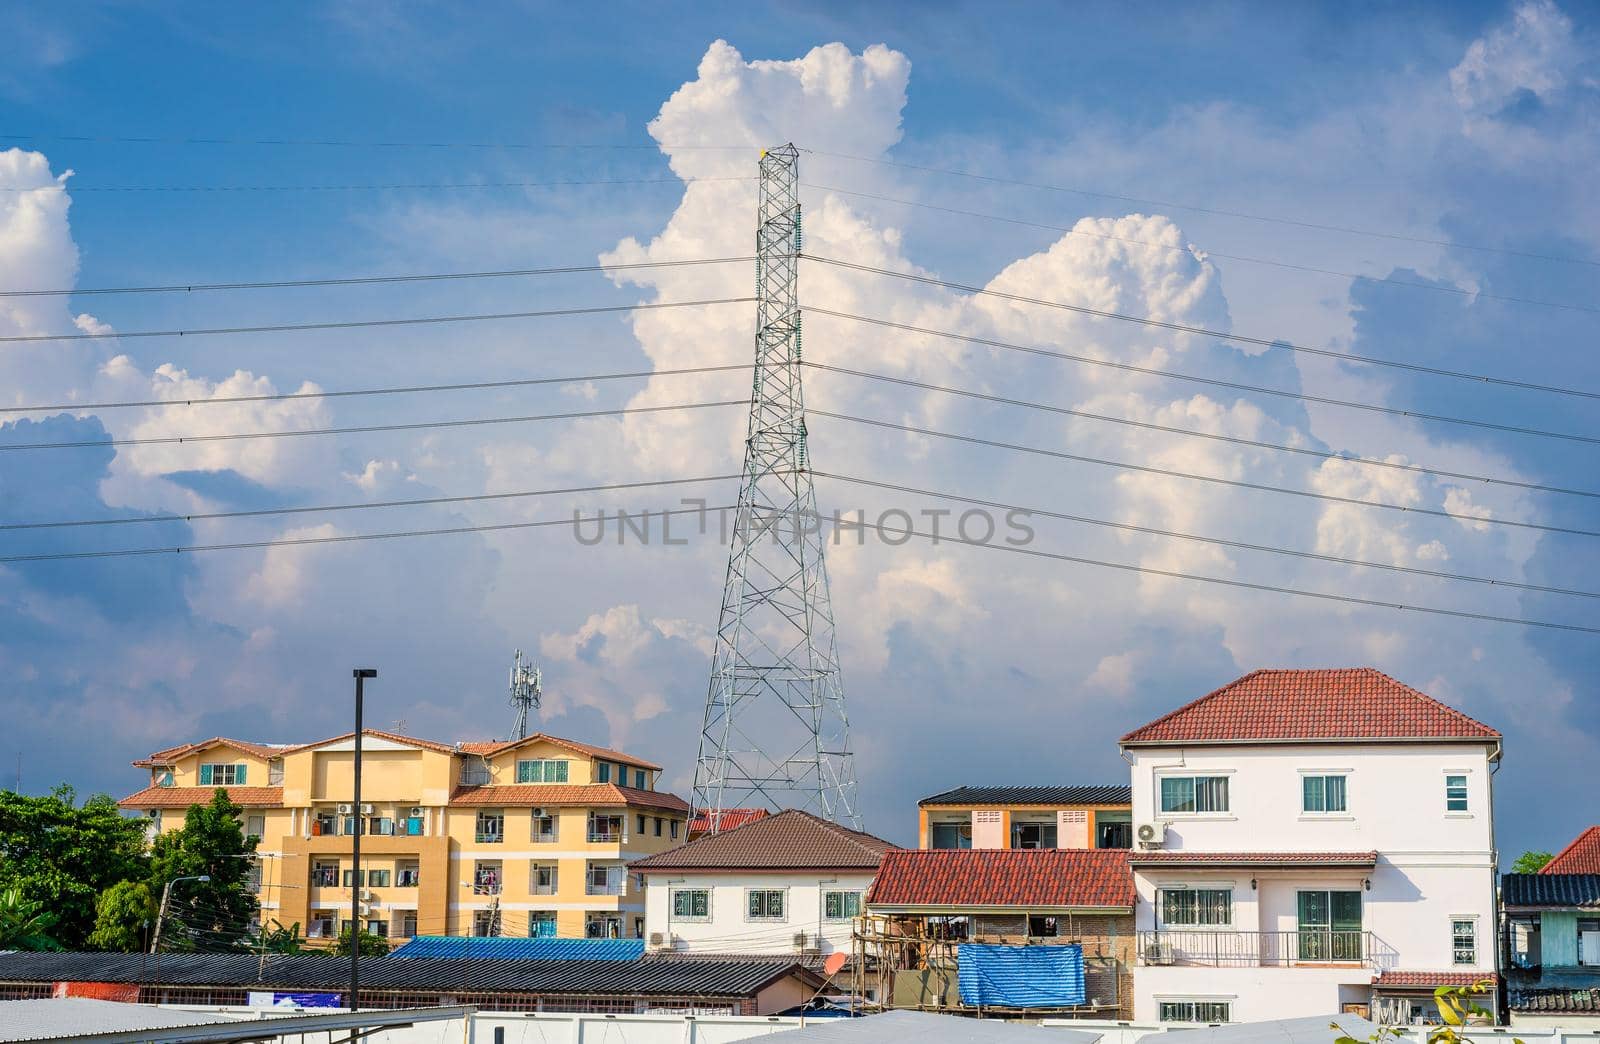 Background of electricity pole system with home in city with cloudy sky by domonite